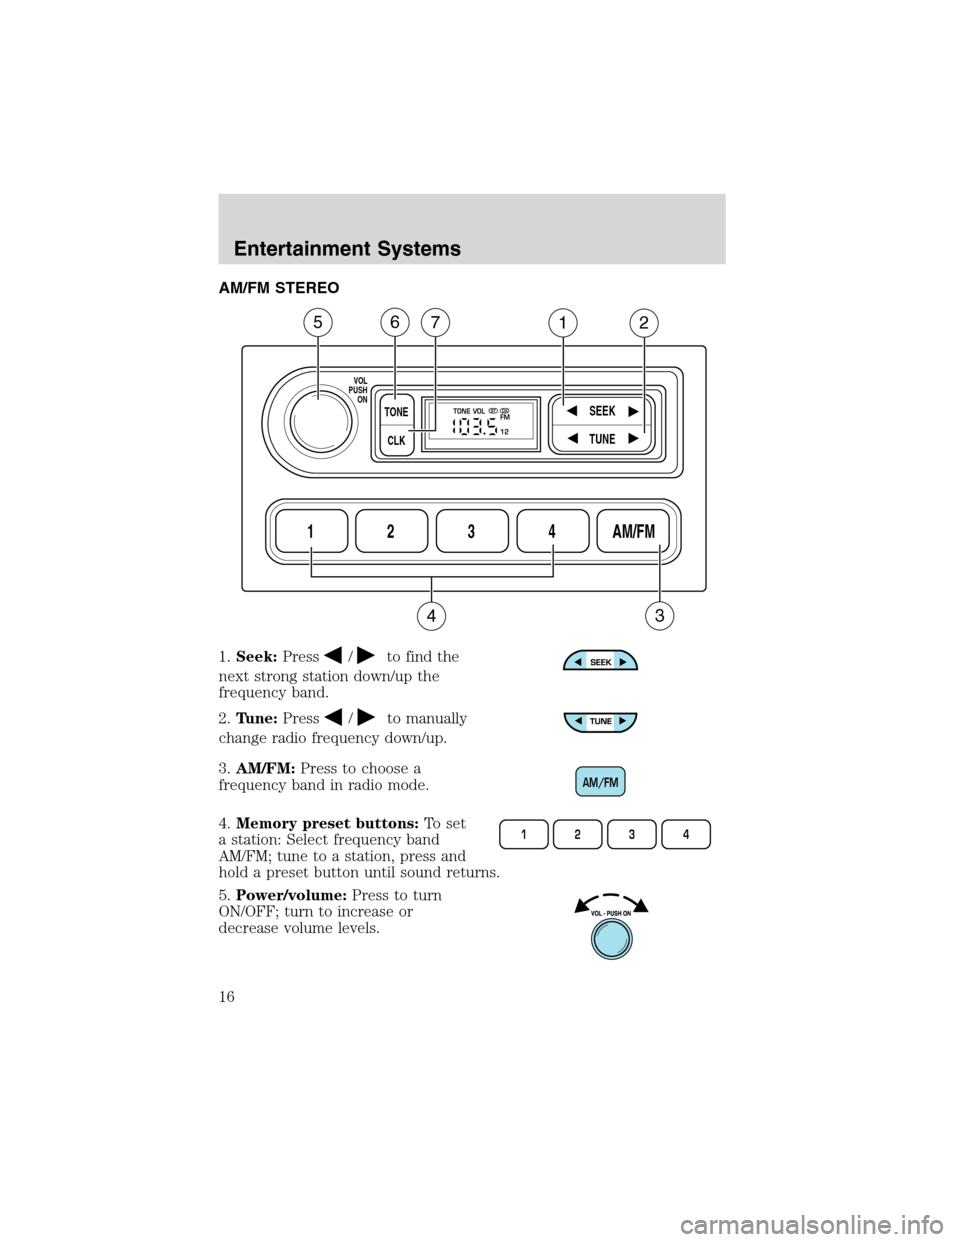 FORD RANGER 2003 2.G User Guide AM/FM STEREO
1.Seek:Press
/to find the
next strong station down/up the
frequency band.
2.Tune:Press
/to manually
change radio frequency down/up.
3.AM/FM:Press to choose a
frequency band in radio mode.